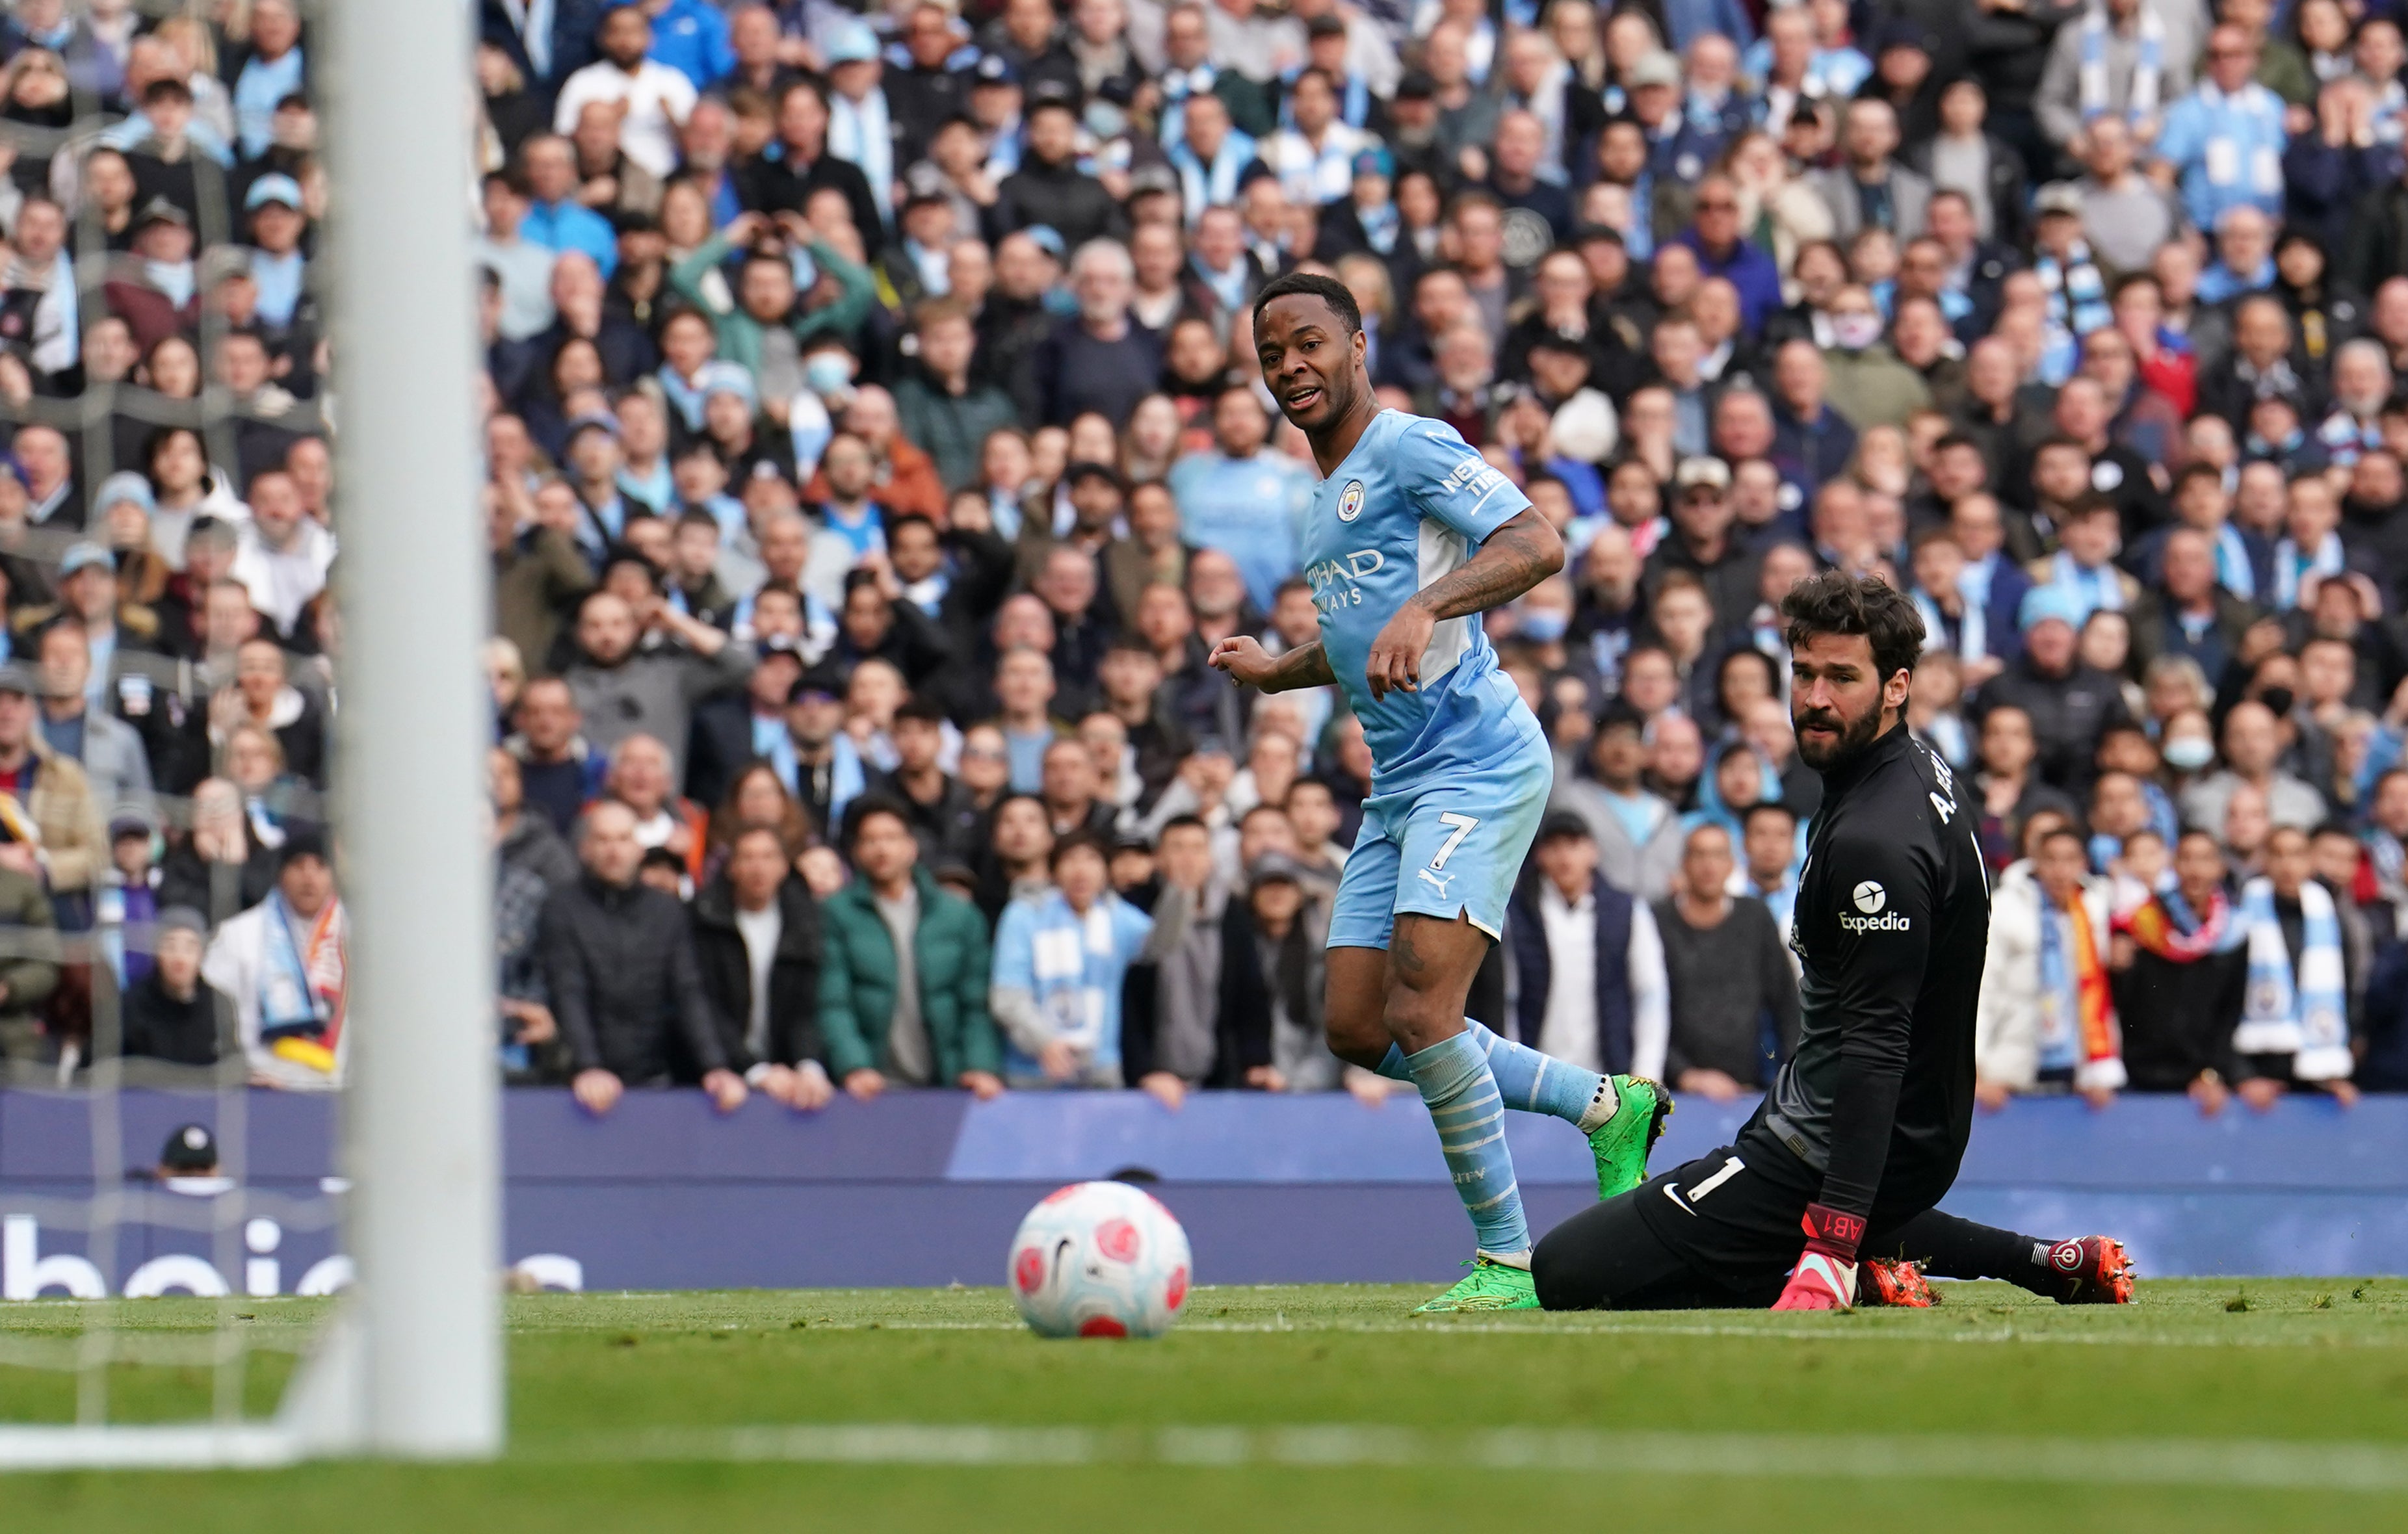 Raheem Sterling’s second-half effort was ruled out by VAR for offside as Manchester City and Liverpool played out a thriller at the Etihad Stadium (Martin Rickett/PA)